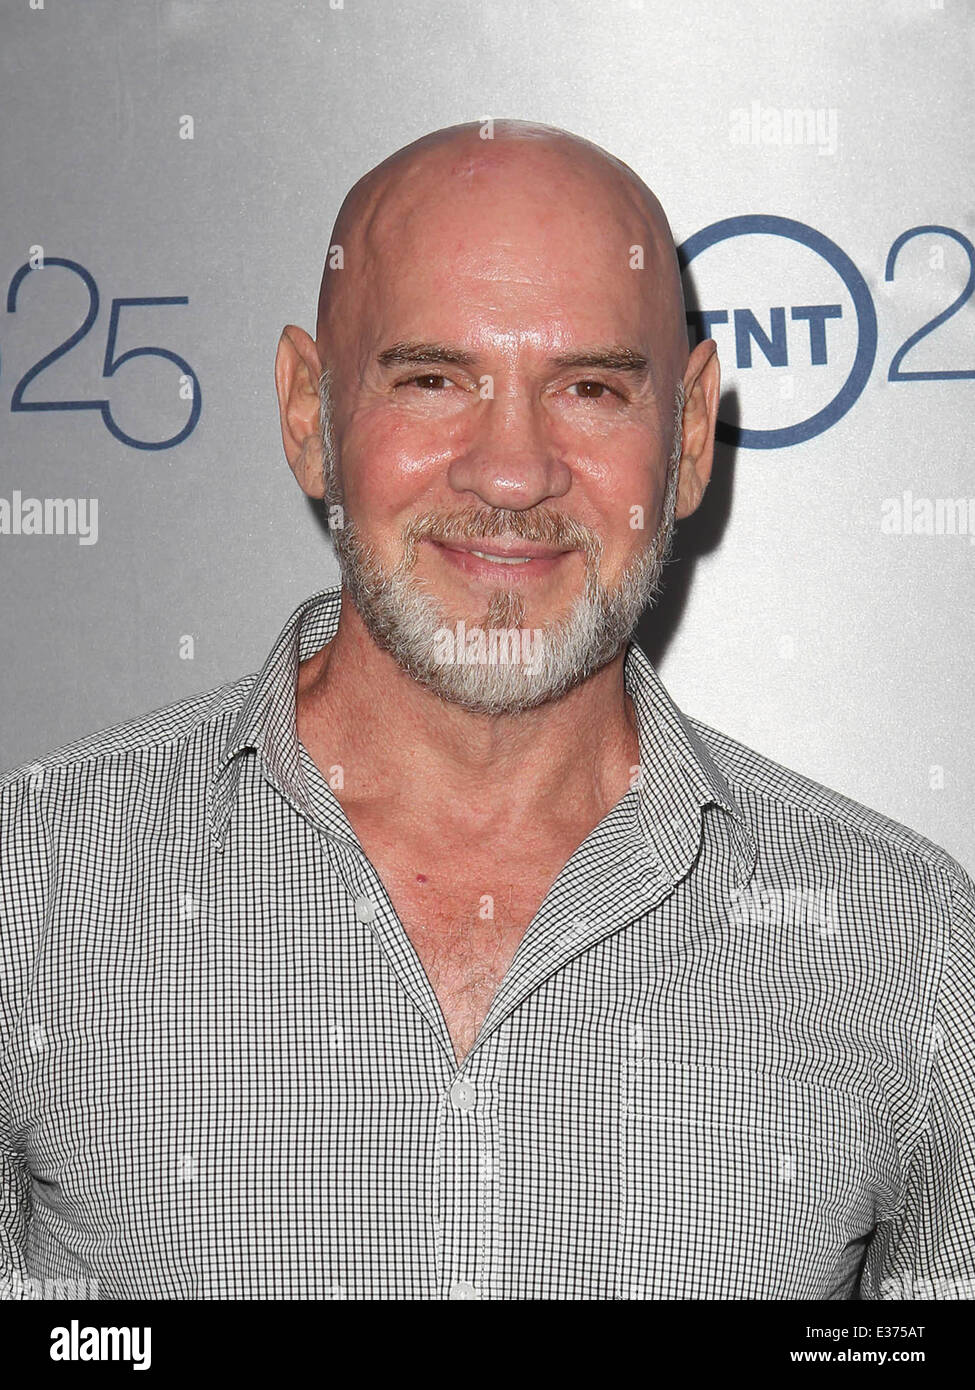 Stock Photo - TNT&#39;s 25th Anniversary Party held at the Aqua Star Pool at The Beverly Hilton Hotel Featuring: Mitch Pileggi Where: Beverly Hills, California, ... - tnts-25th-anniversary-party-held-at-the-aqua-star-pool-at-the-beverly-E375AT